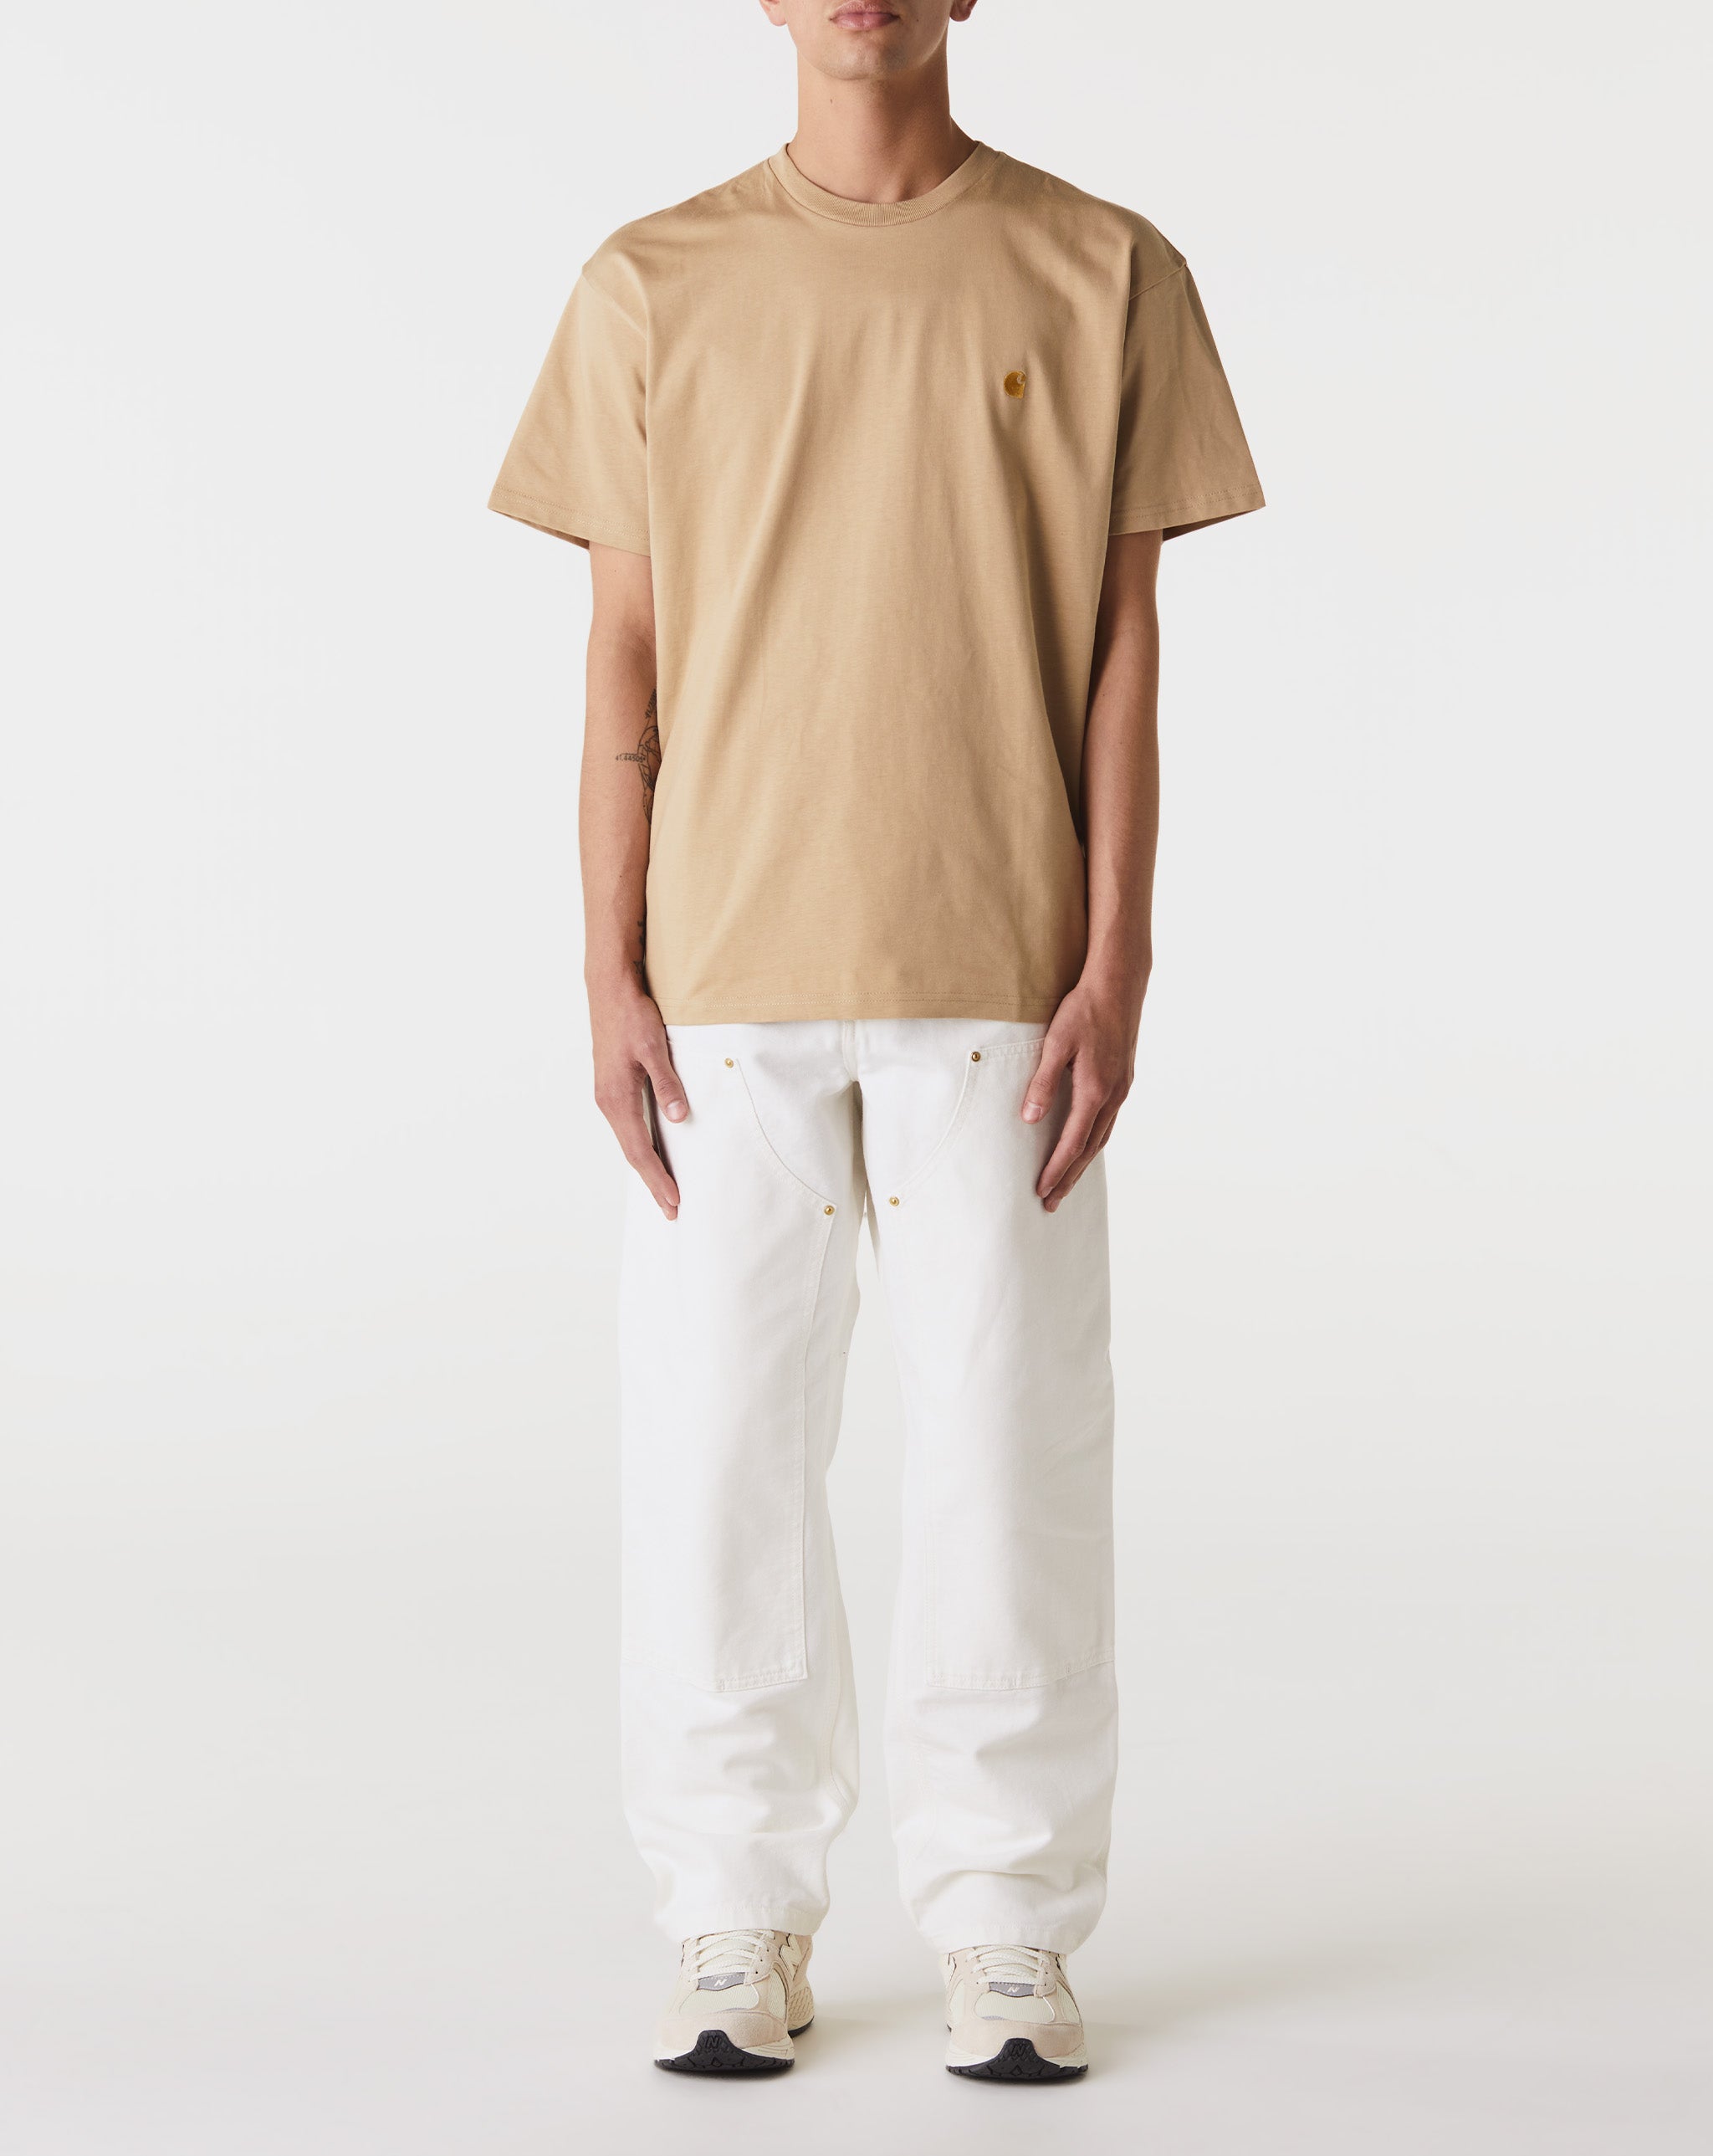 Carhartt WIP Chase T-Shirt - Rule of Next Apparel